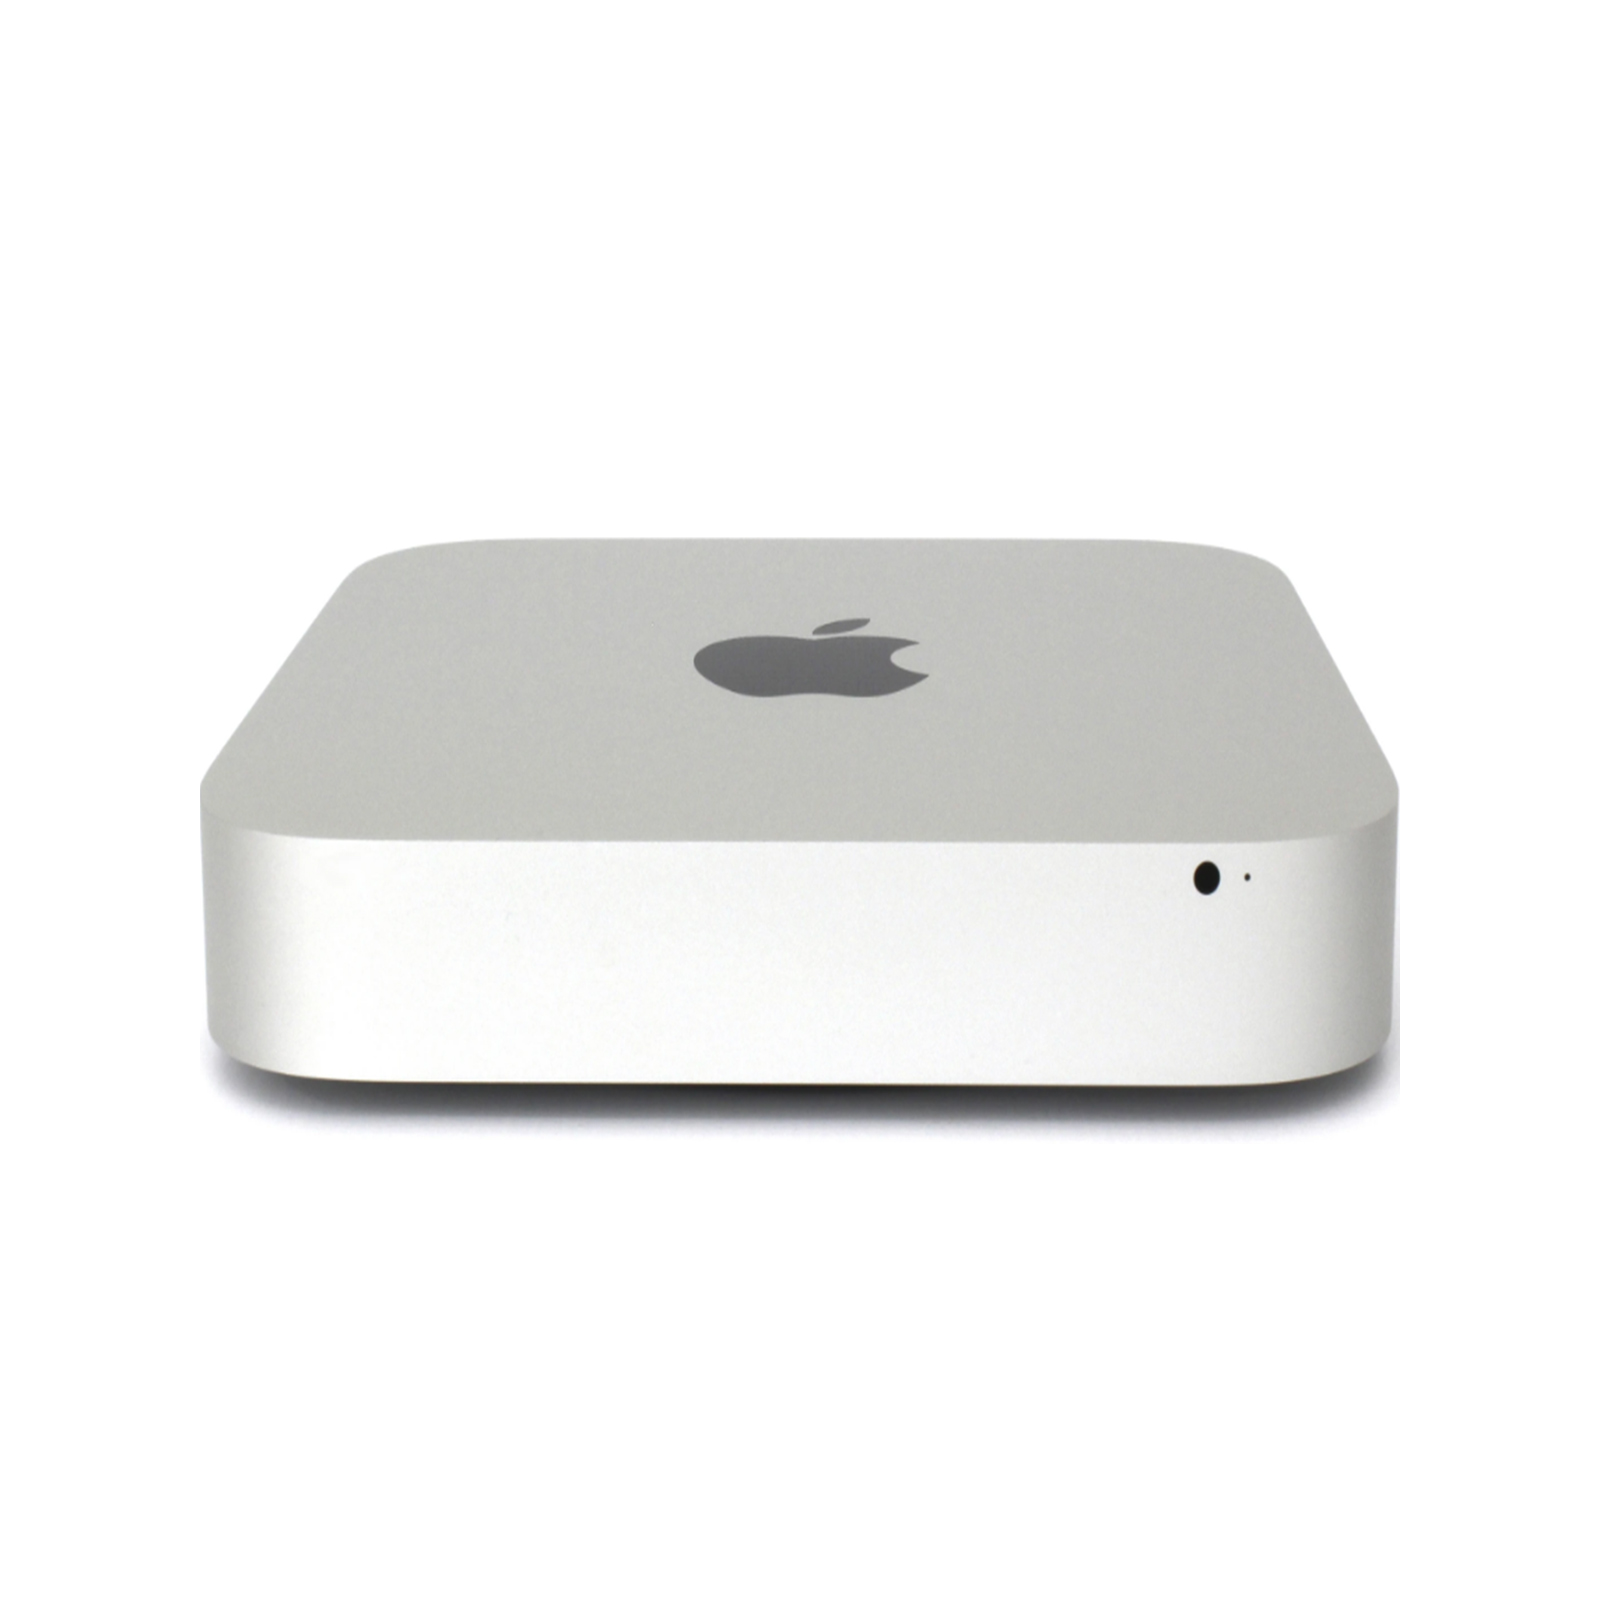 Mac Mini Late 2012 - Excellent / Very Good / Good Condition